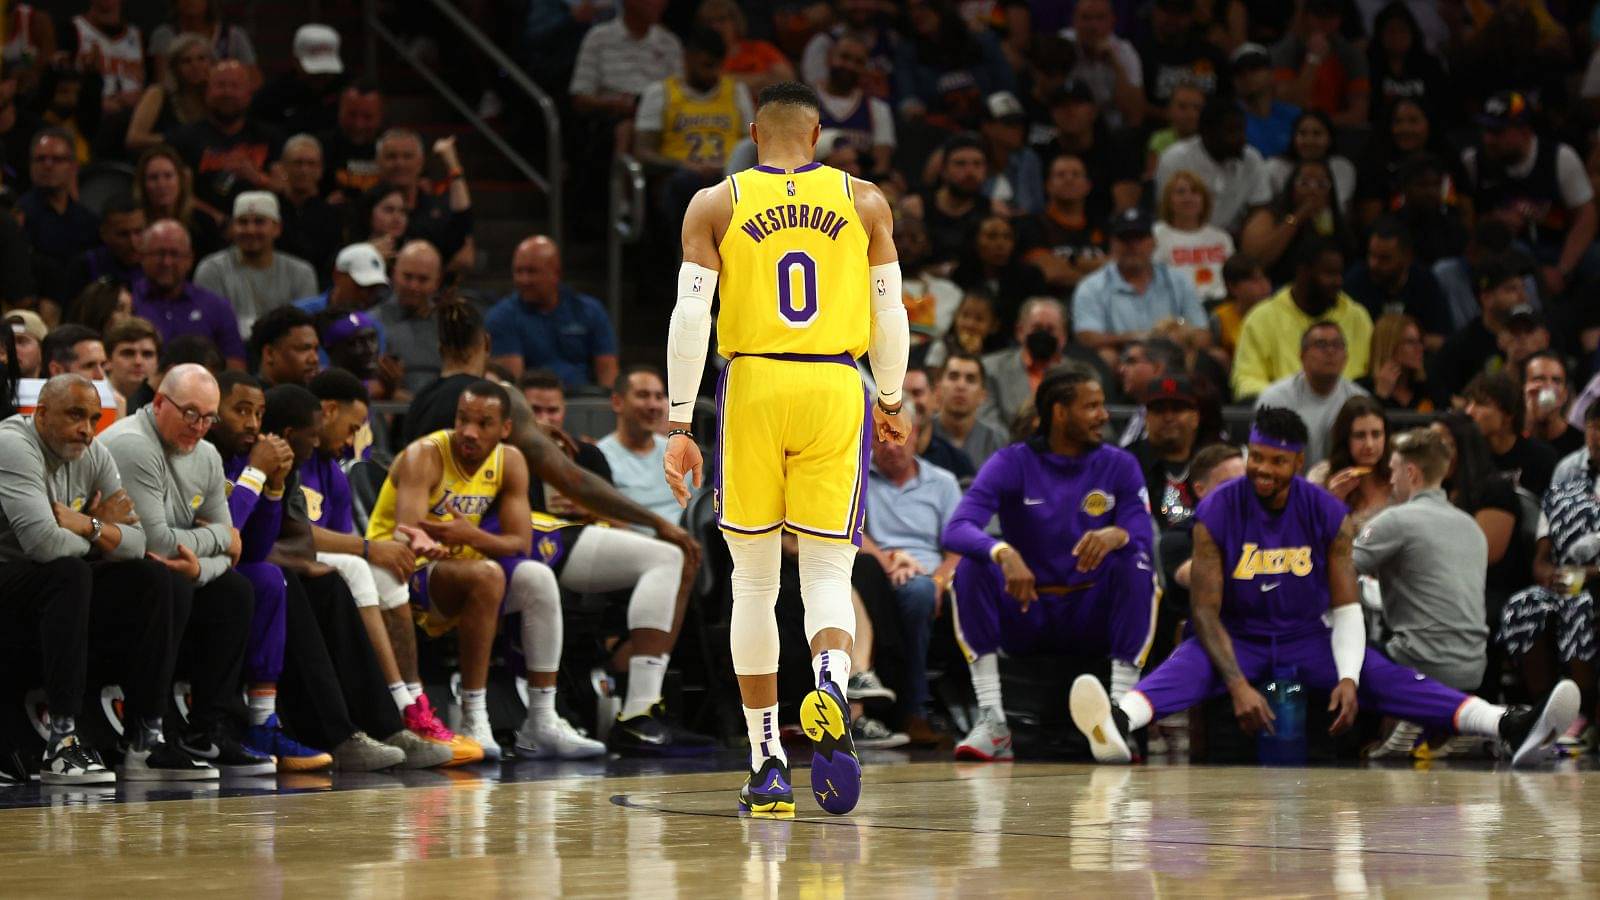 "Russell Westbrook is very open to a trade": ESPN analyst claims Lakers star still unsettled in LA